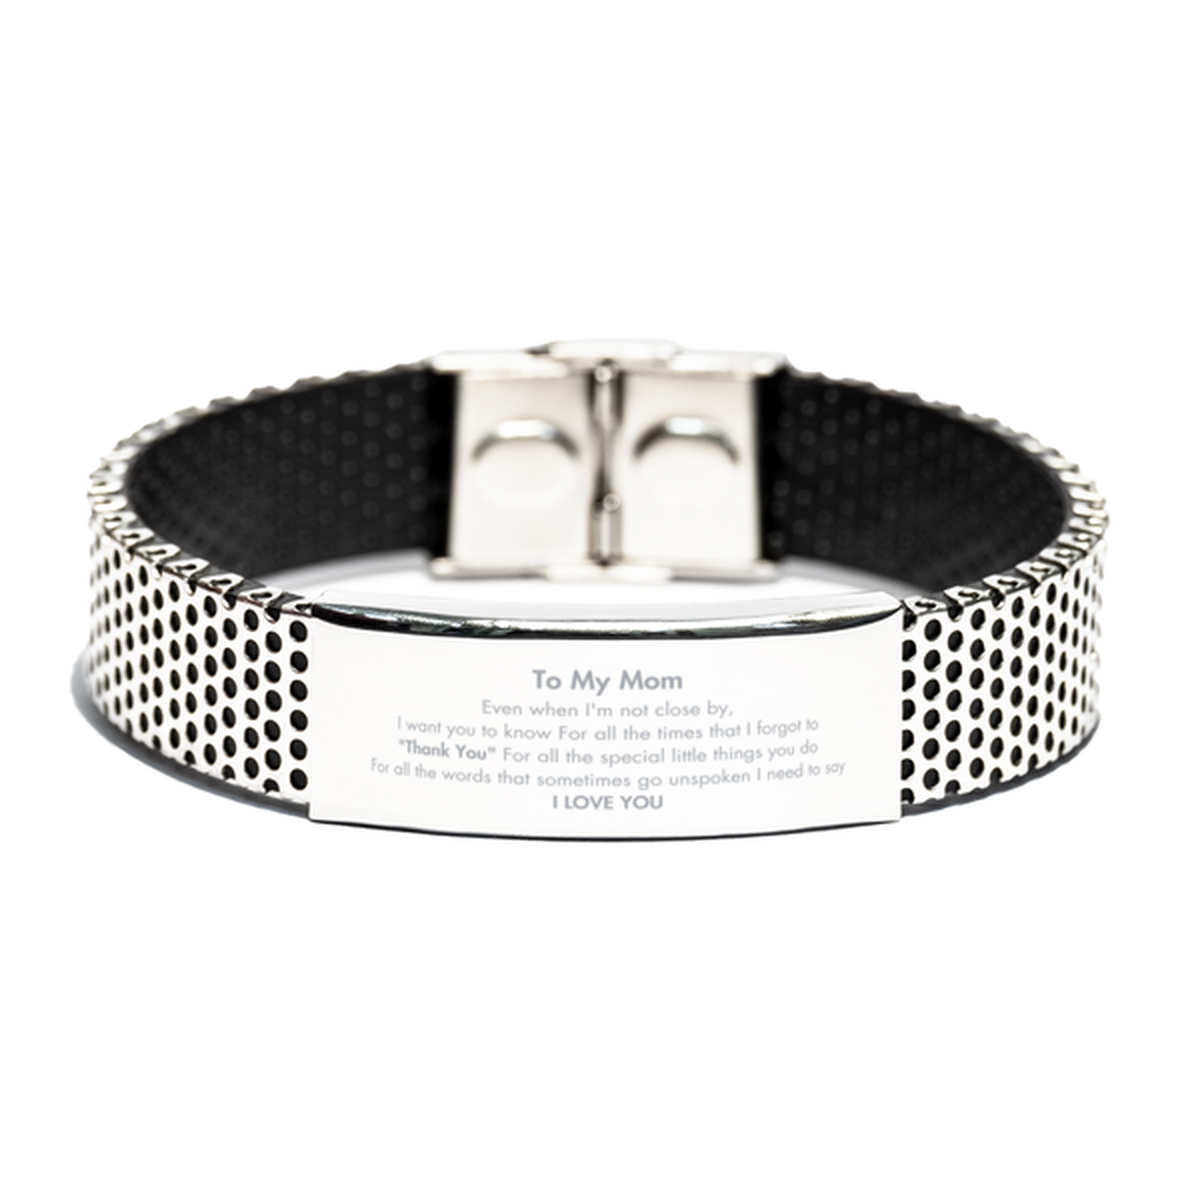 Thank You Gifts for Mom, Keepsake Stainless Steel Bracelet Gifts for Mom Birthday Mother's day Father's Day Mom For all the words That sometimes go unspoken I need to say I LOVE YOU